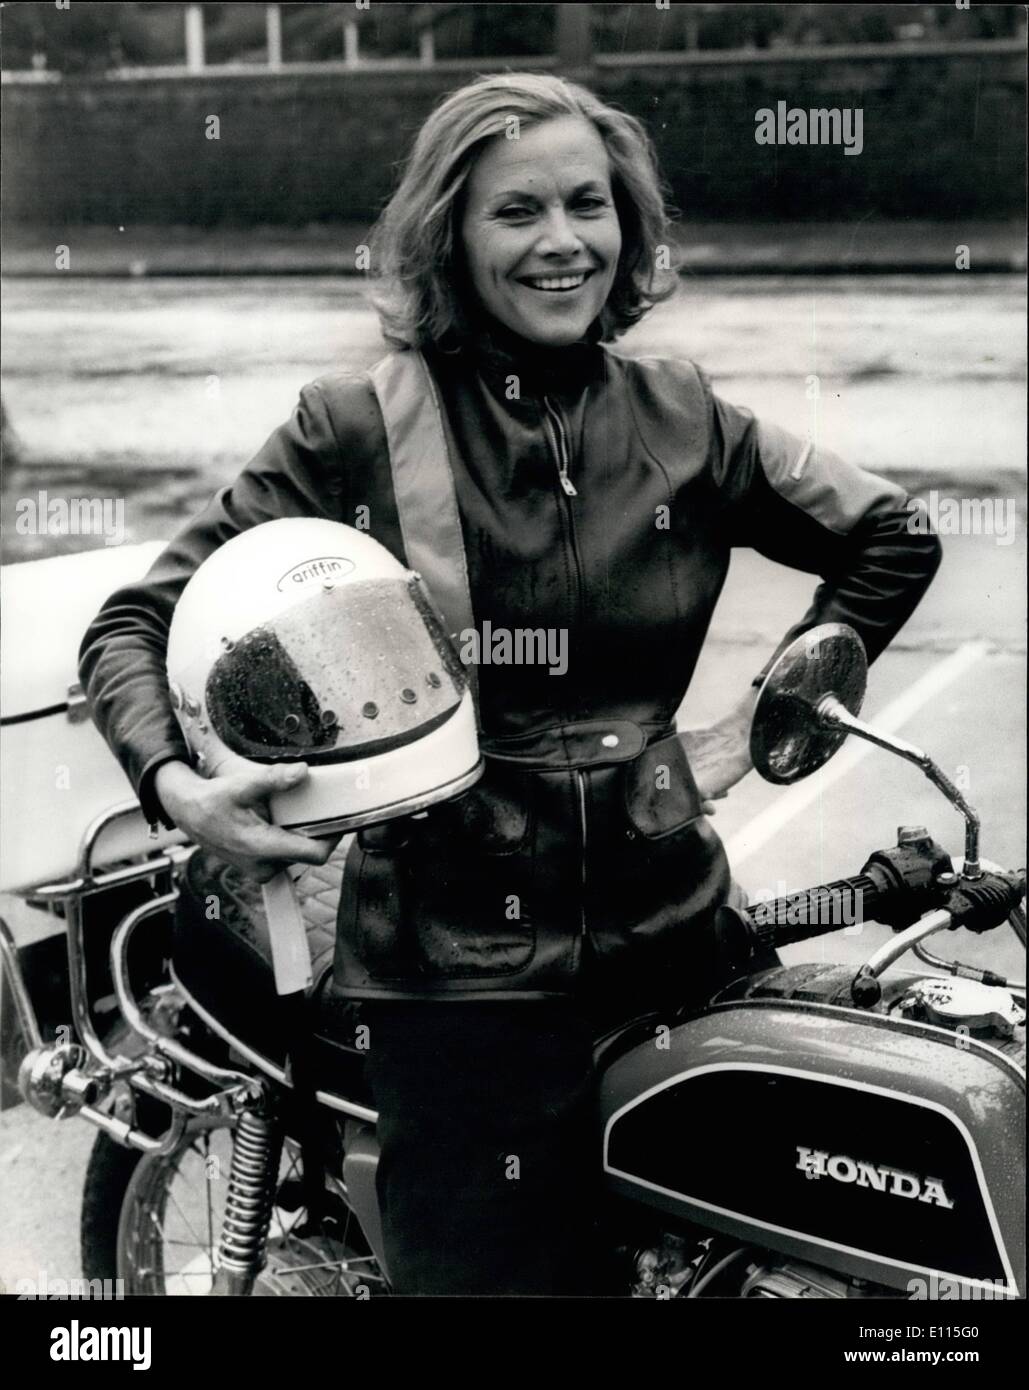 Sep. 09, 1975 - Honor Blackman of the ''Avengers'' fame with her new honda.: Honour Blackman, star of the T.V.'s ''The Avengers'' and numerous film spectaculars went to Garratt Lane Autos to take delivery of her own Honda CB 200 motorcycle. In keeping with her image she was clad in leathers. Photo shows Honour Blackman seen with her latest Honda 200 which she collected in tooting this morning. Stock Photo